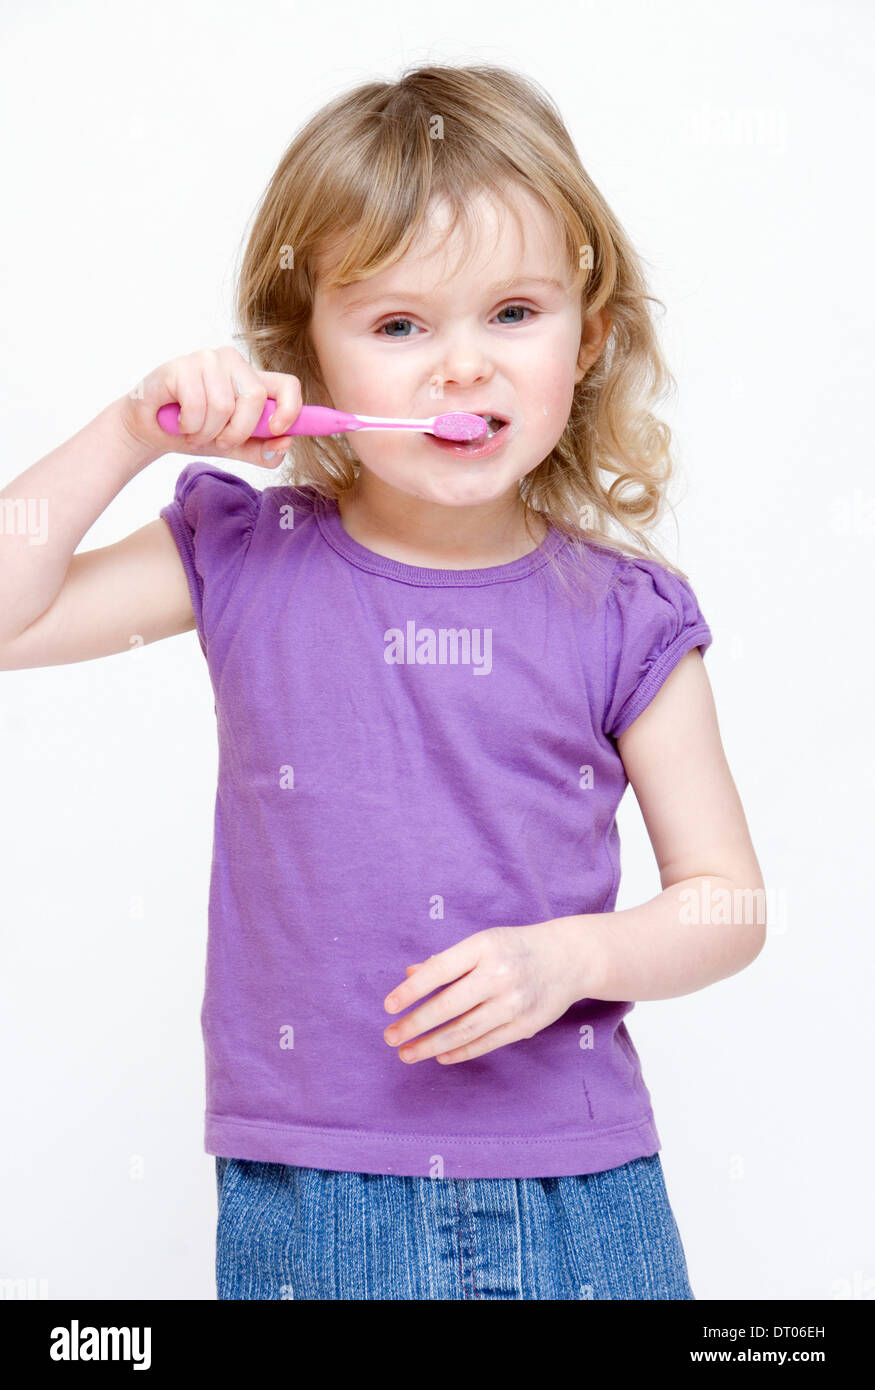 Cute little girl brushing her teeth, isolated on white Stock Photo